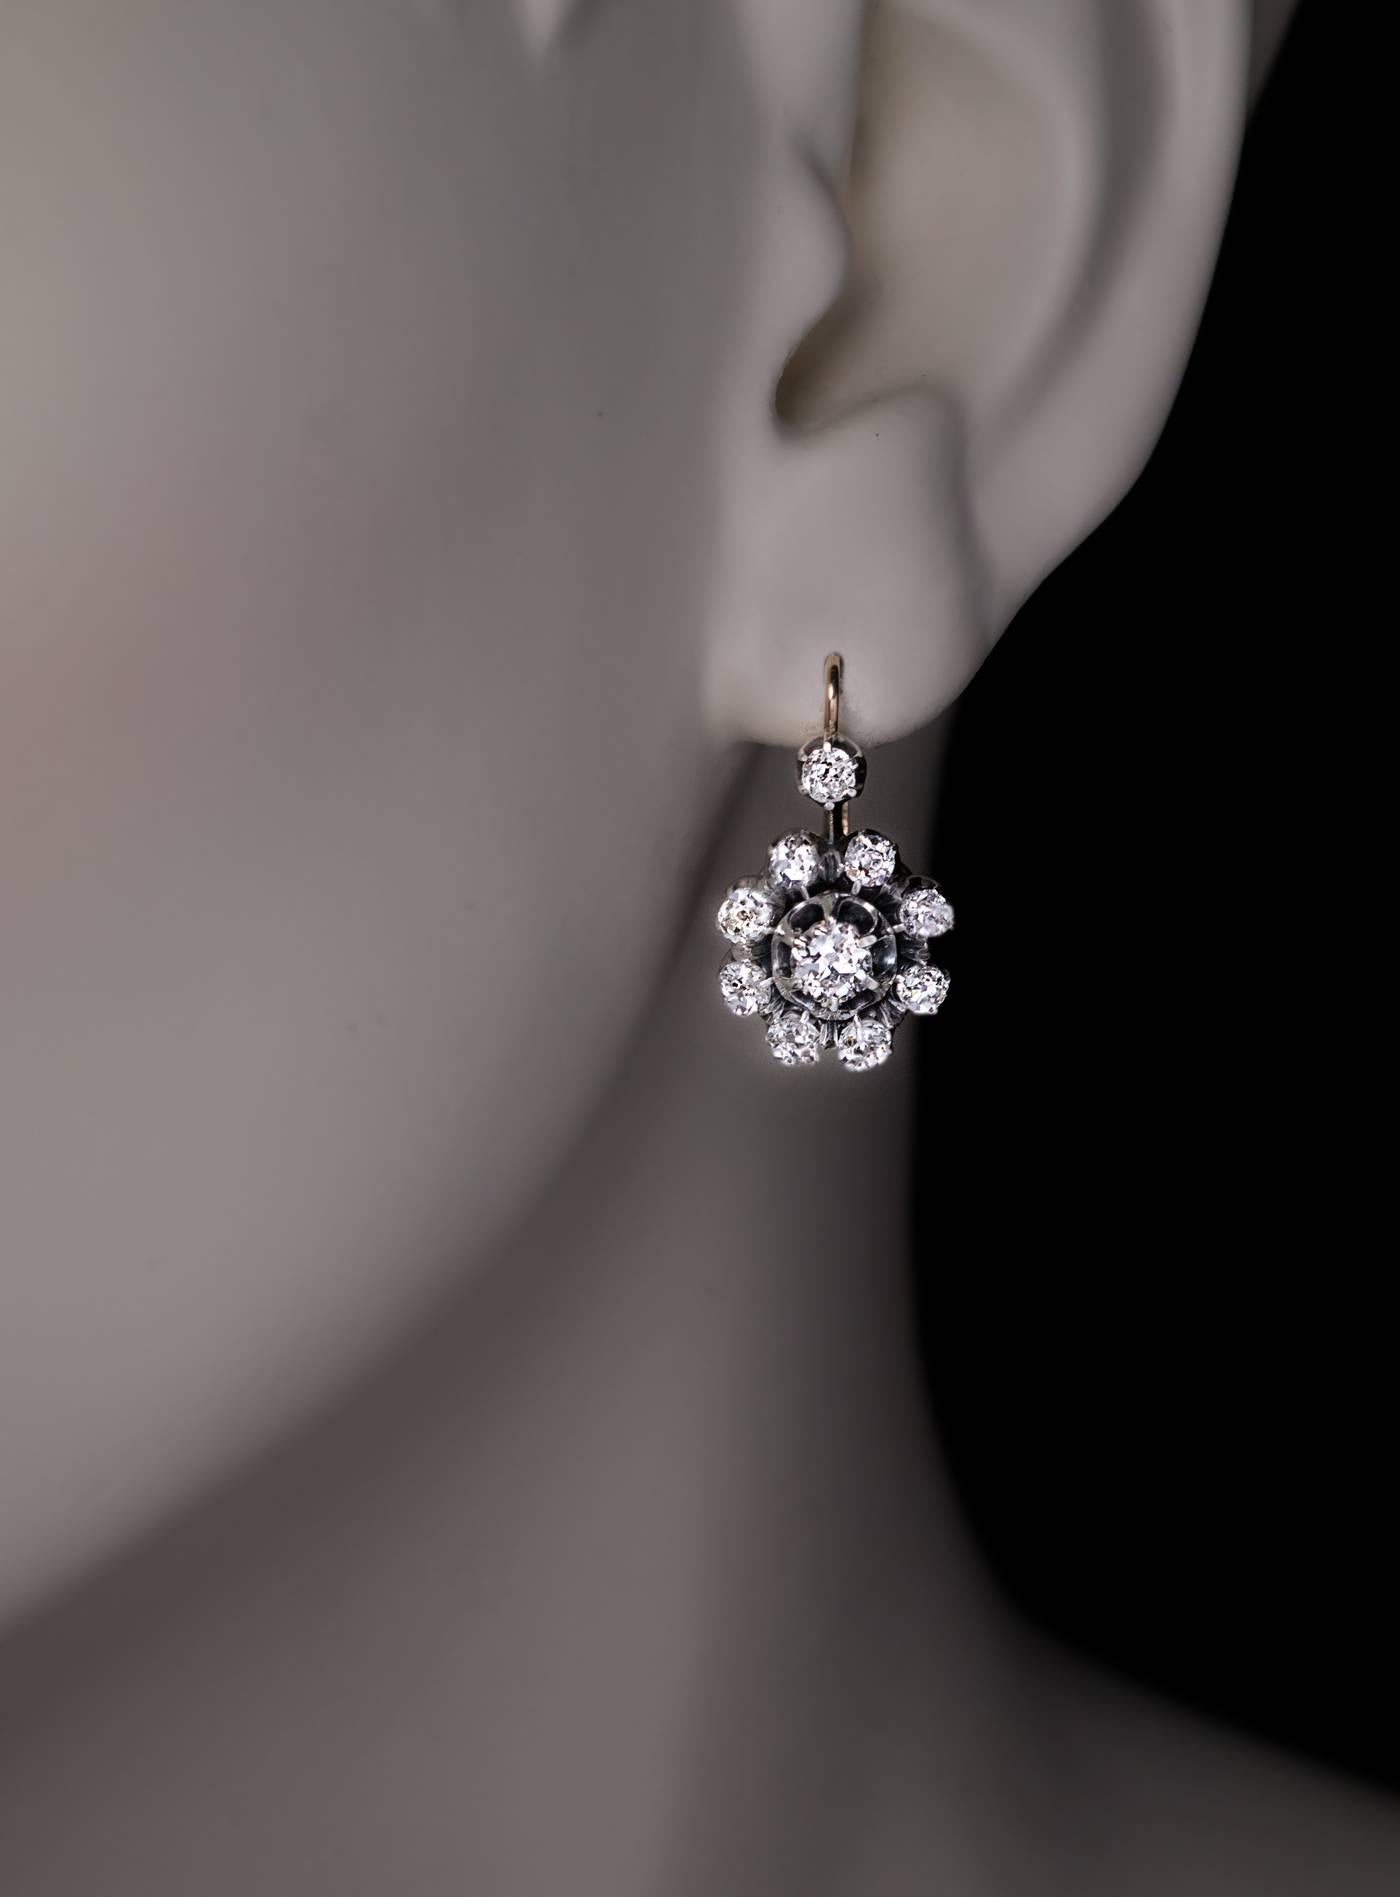 These snowflake-motif silver-topped 14K gold cluster earrings were made in Russia in the 1890s.
Each earring is centered with a bright white old European cut diamond (approximately 0.35 ct, F color, VS-SI clarity) encircled by sparkling old mine cut